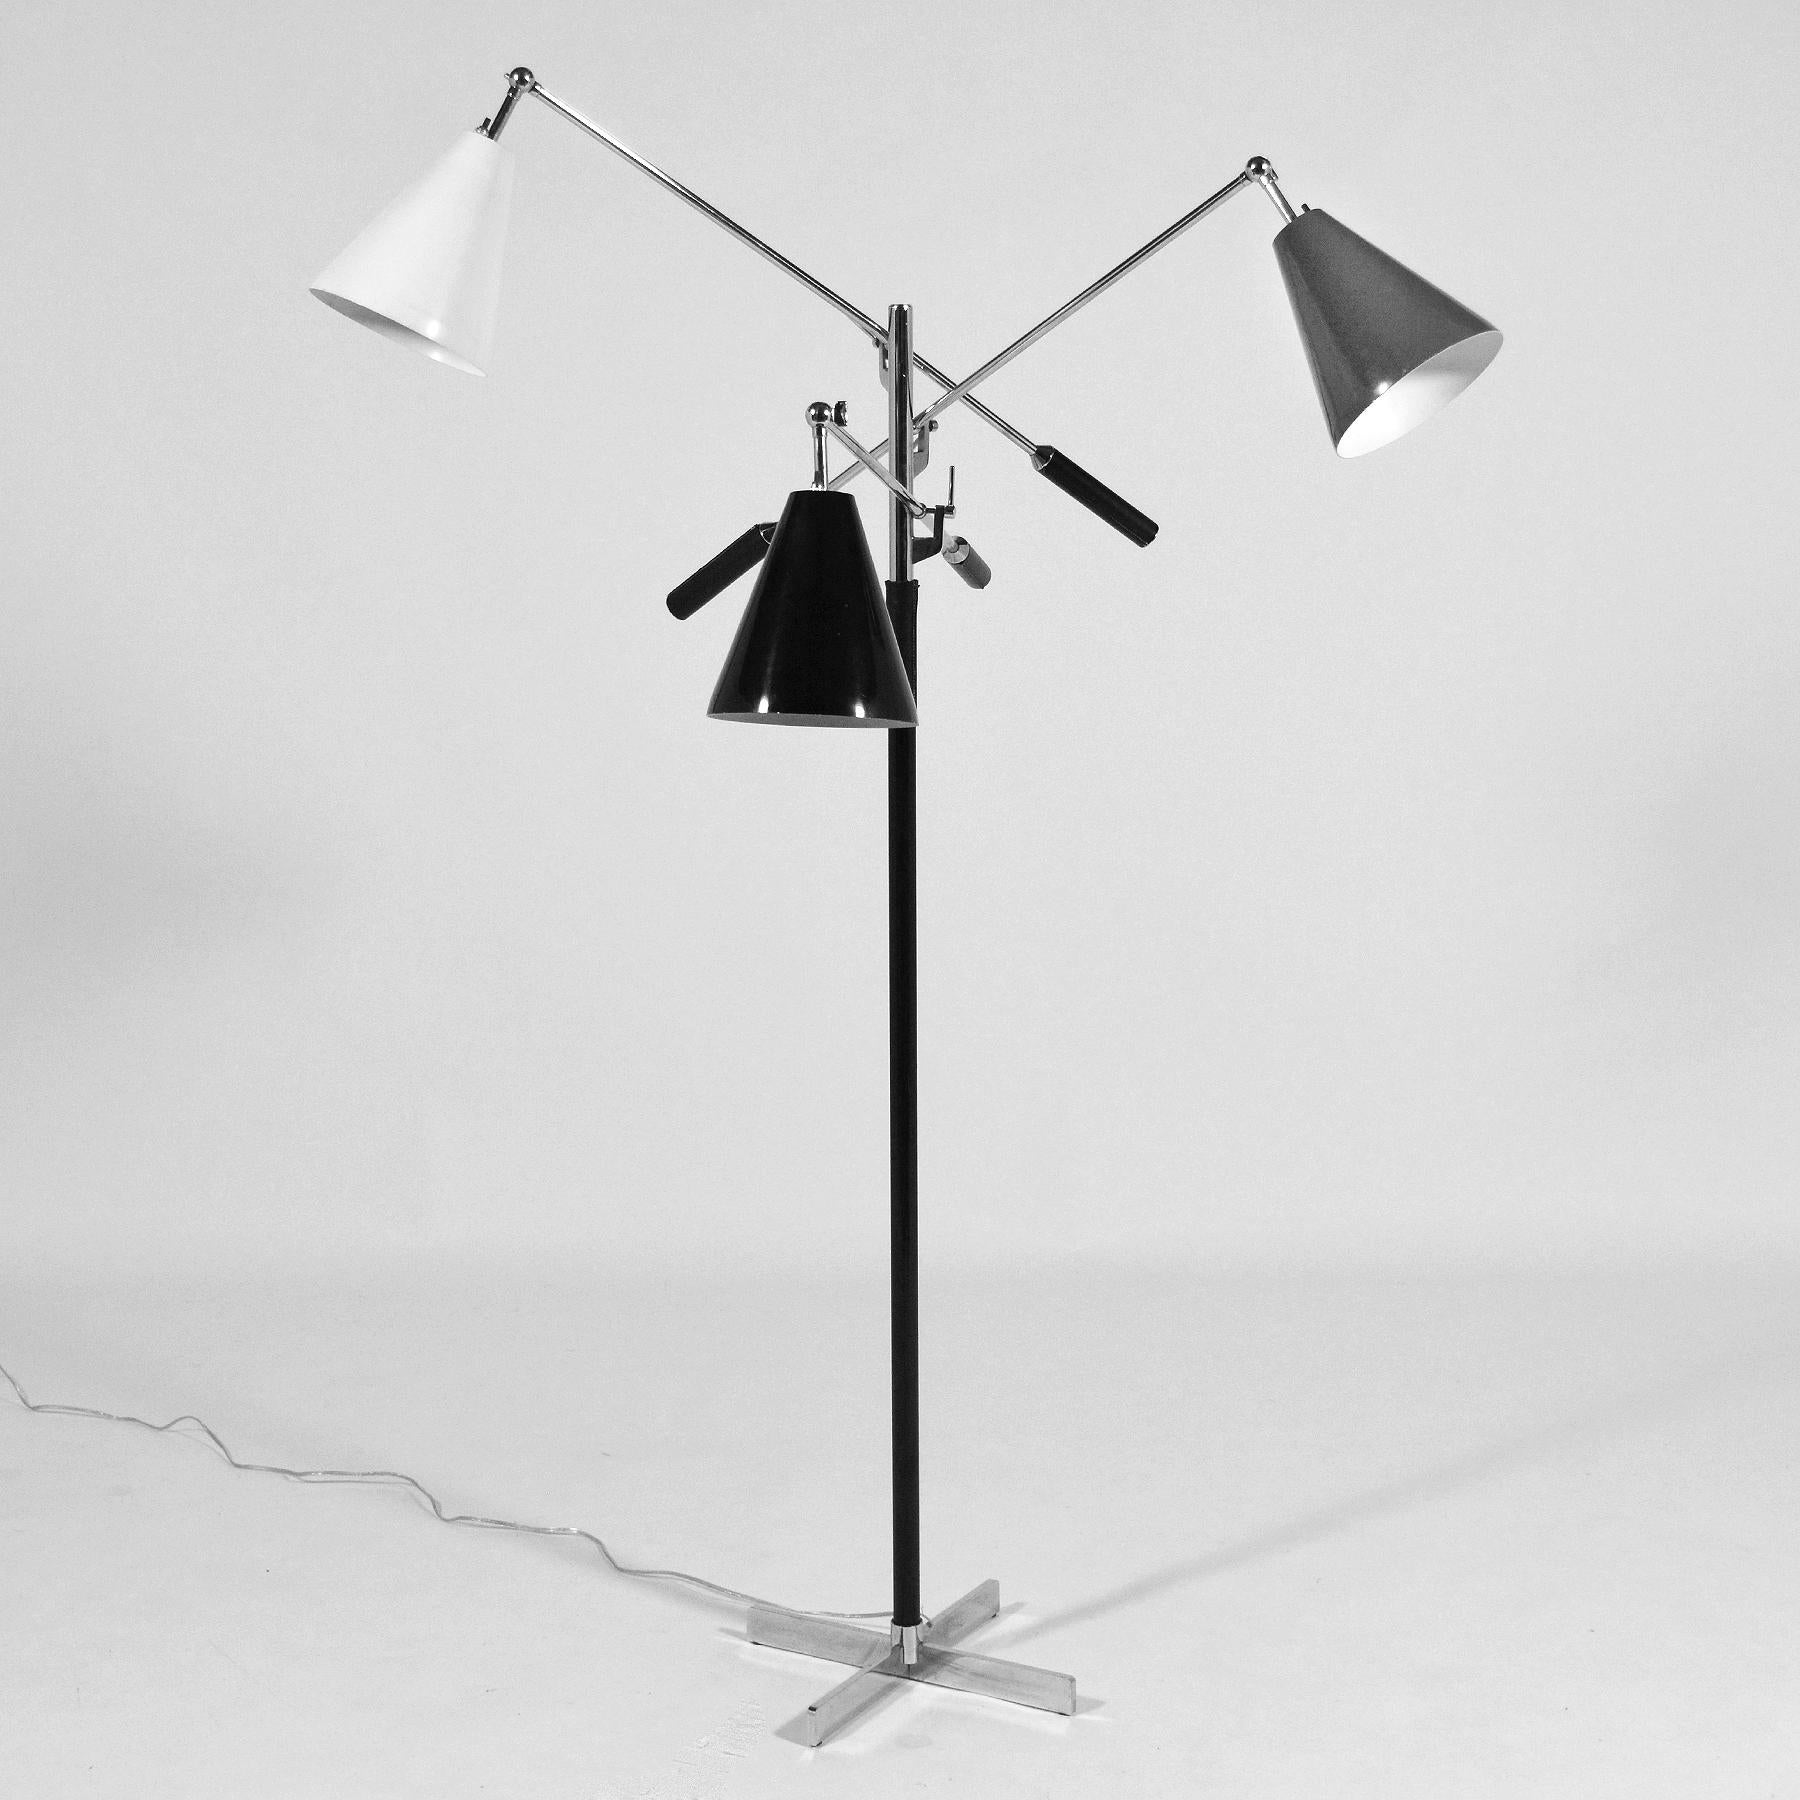 An iconic mid-century design, the Triennale floor lamp is not only beautiful, but a highly functional design. With three articulating arms each topped with an articulating shade the lamp can offer both direct or indirect light in nearly any